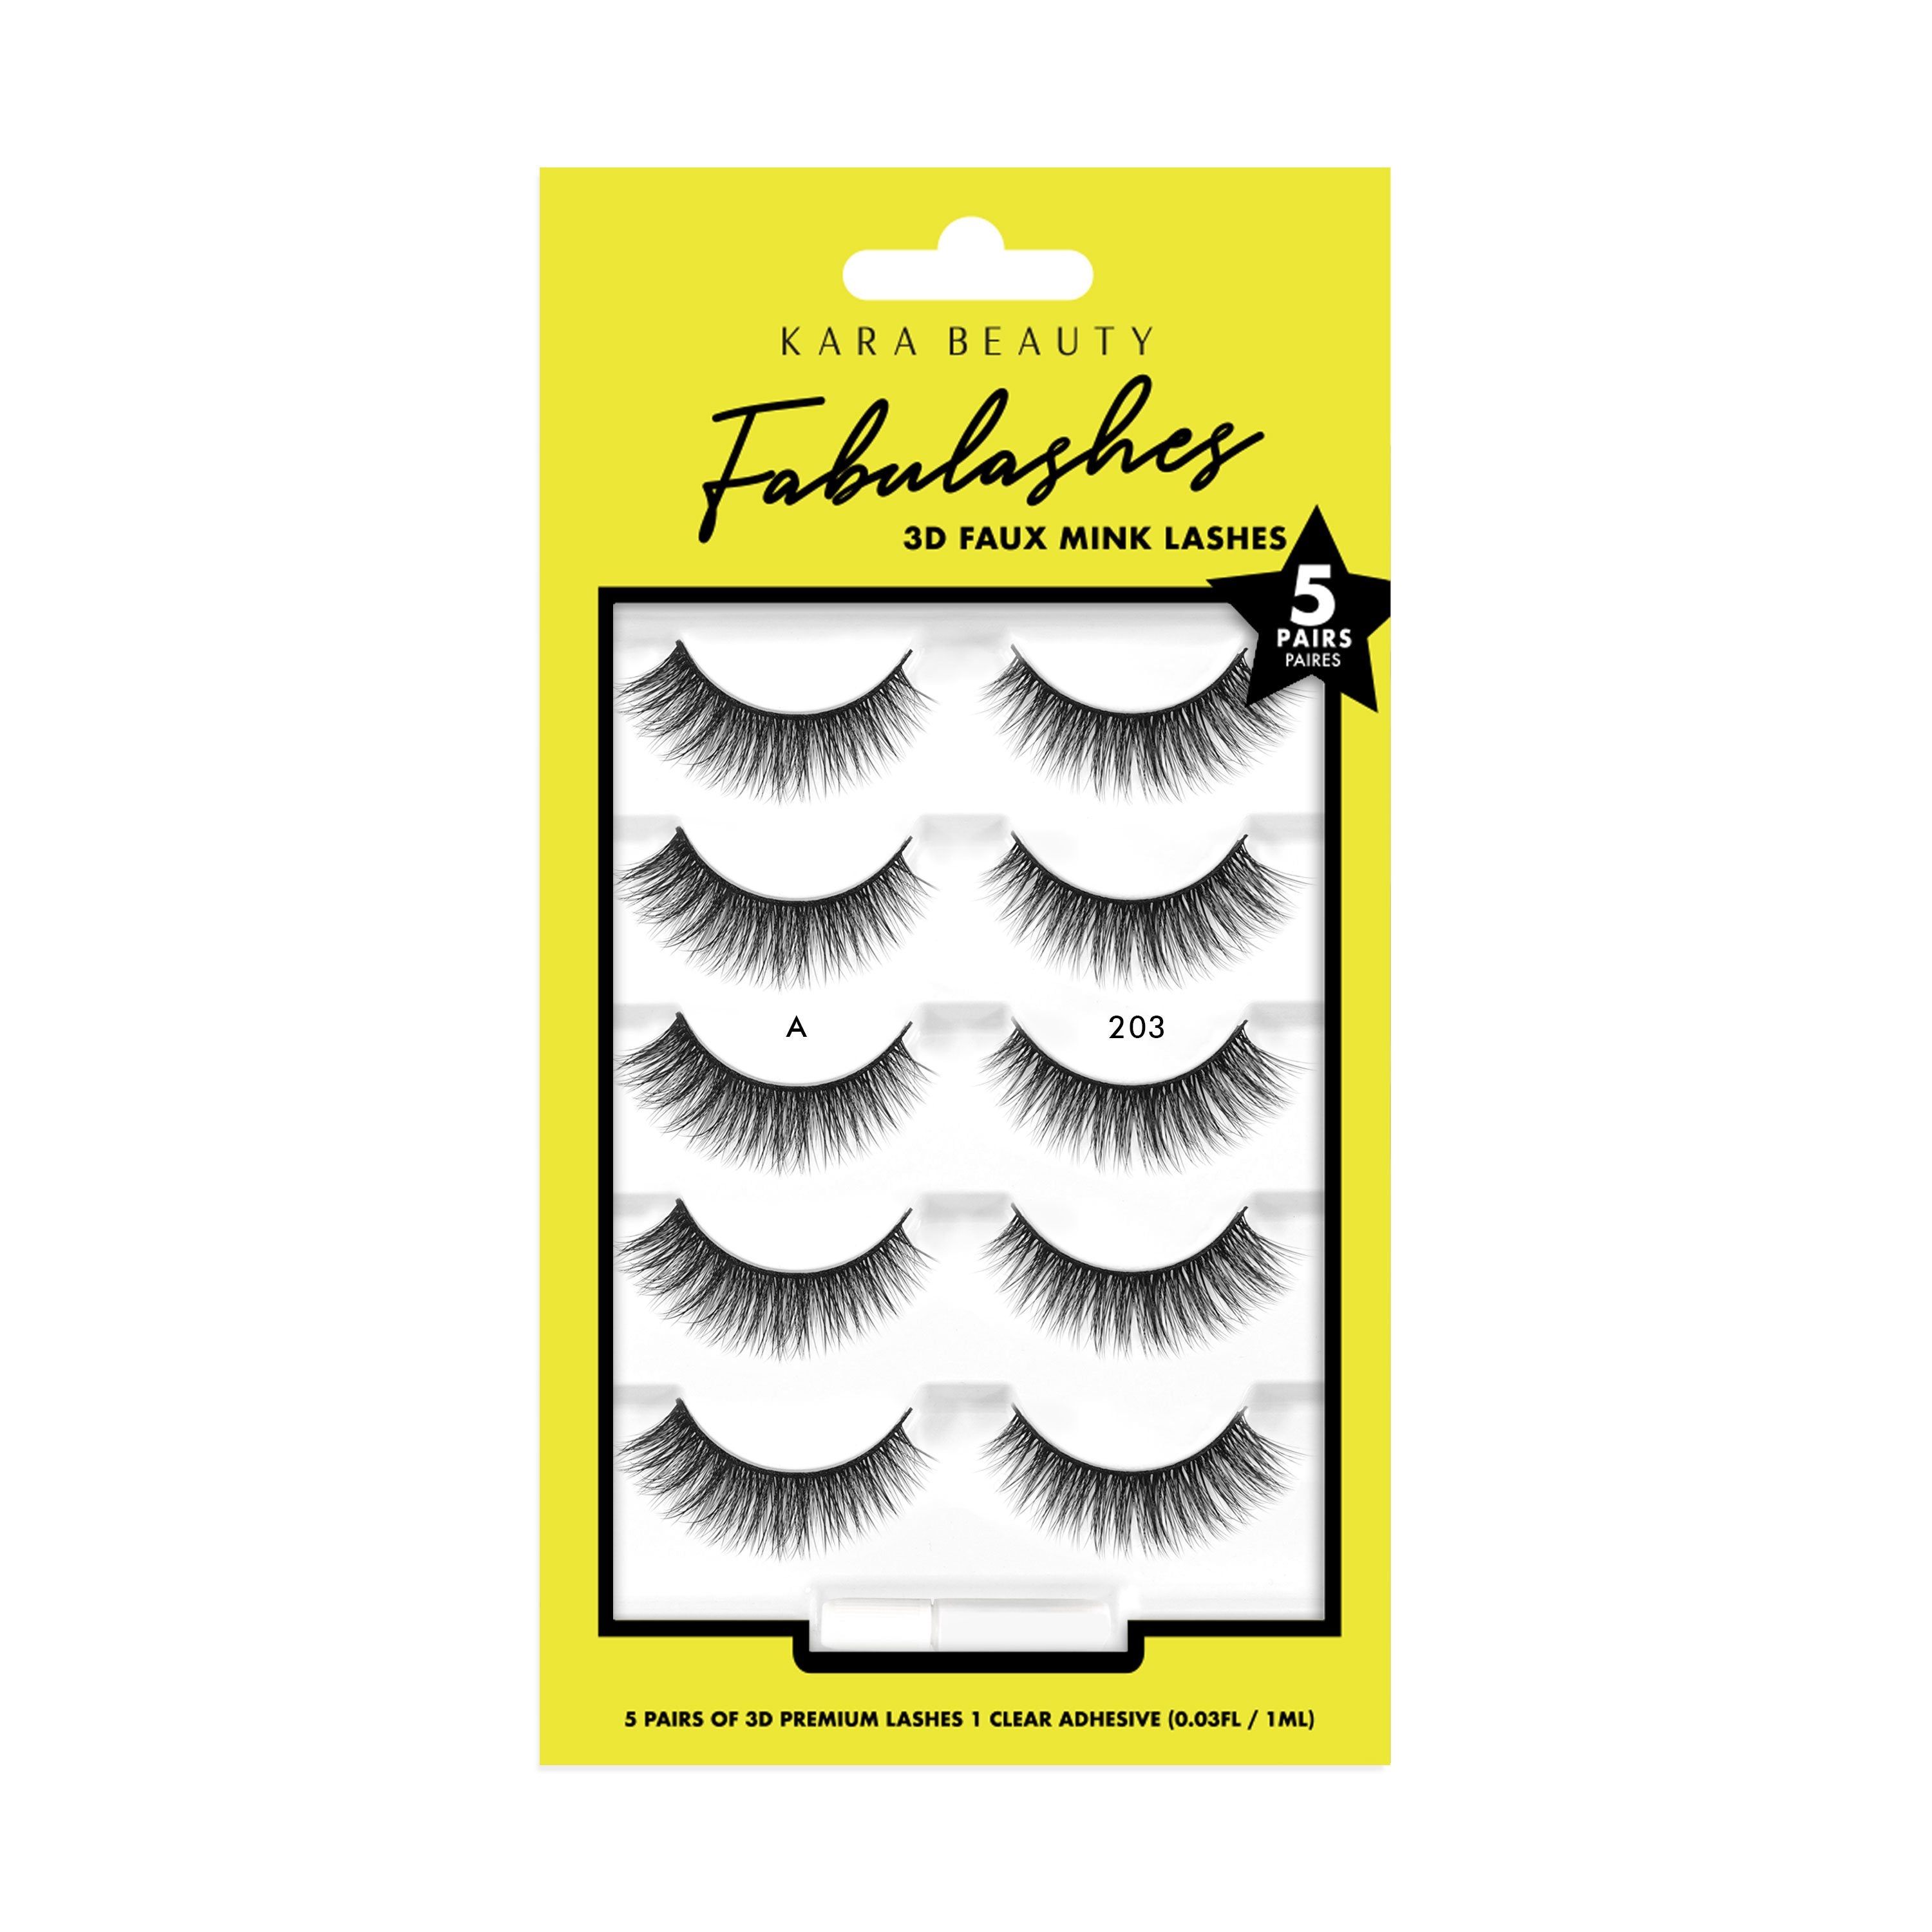 Fabulashes 3D faux mink eyelashes in 5 pair multipack